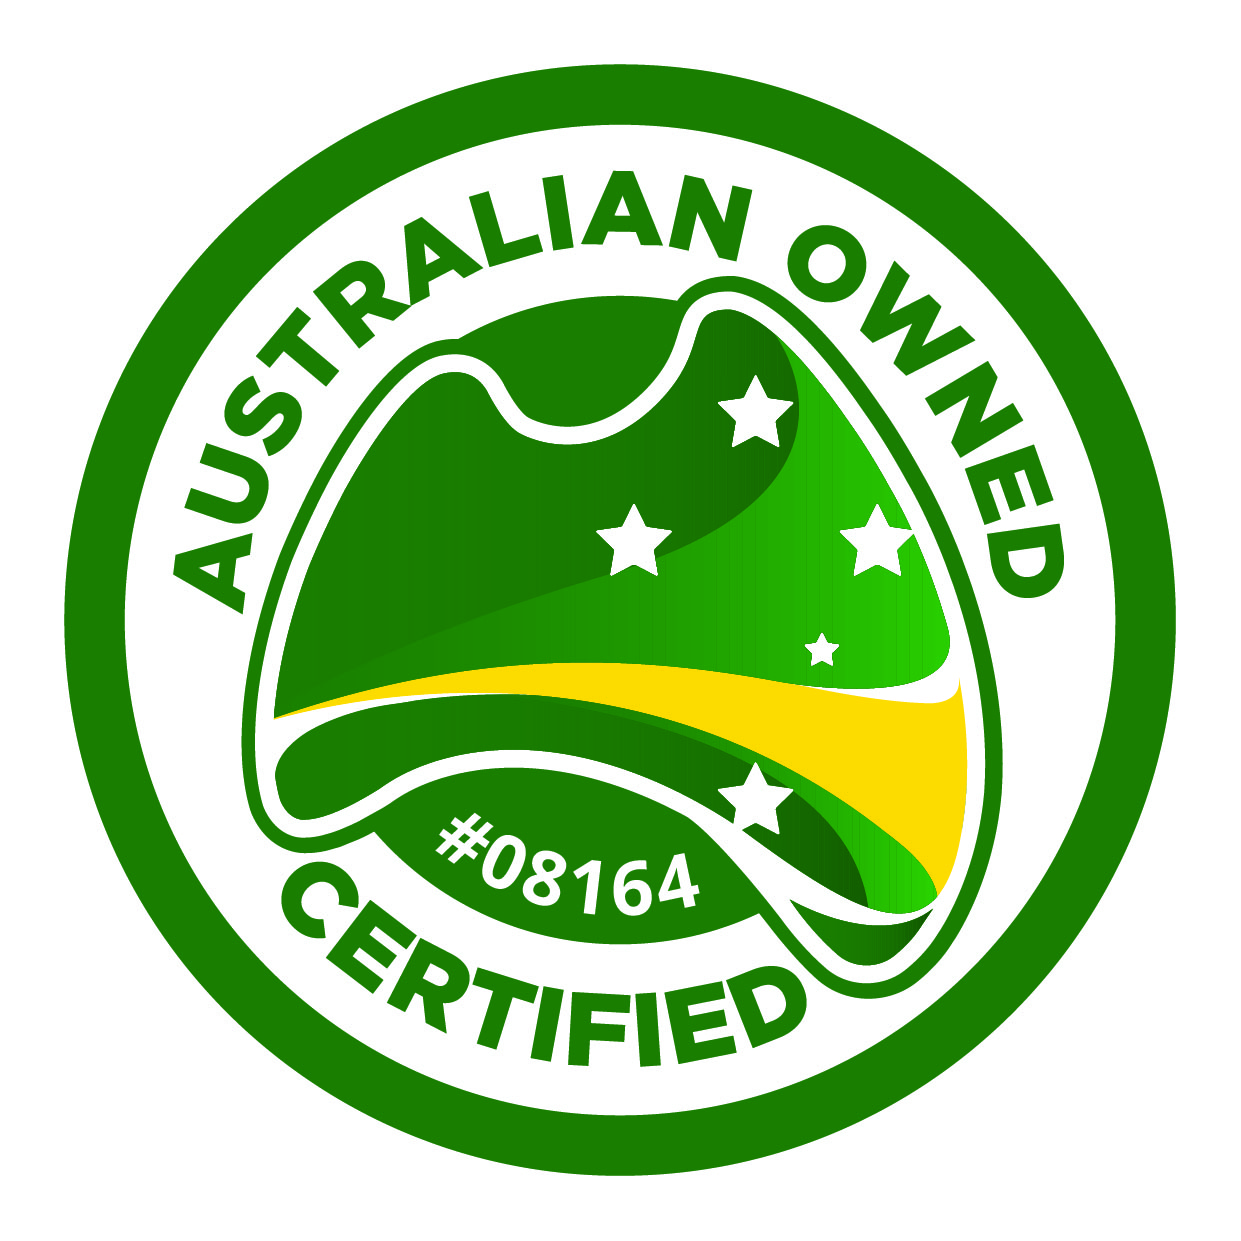 Coffey Testing is Australian Owned and Certified